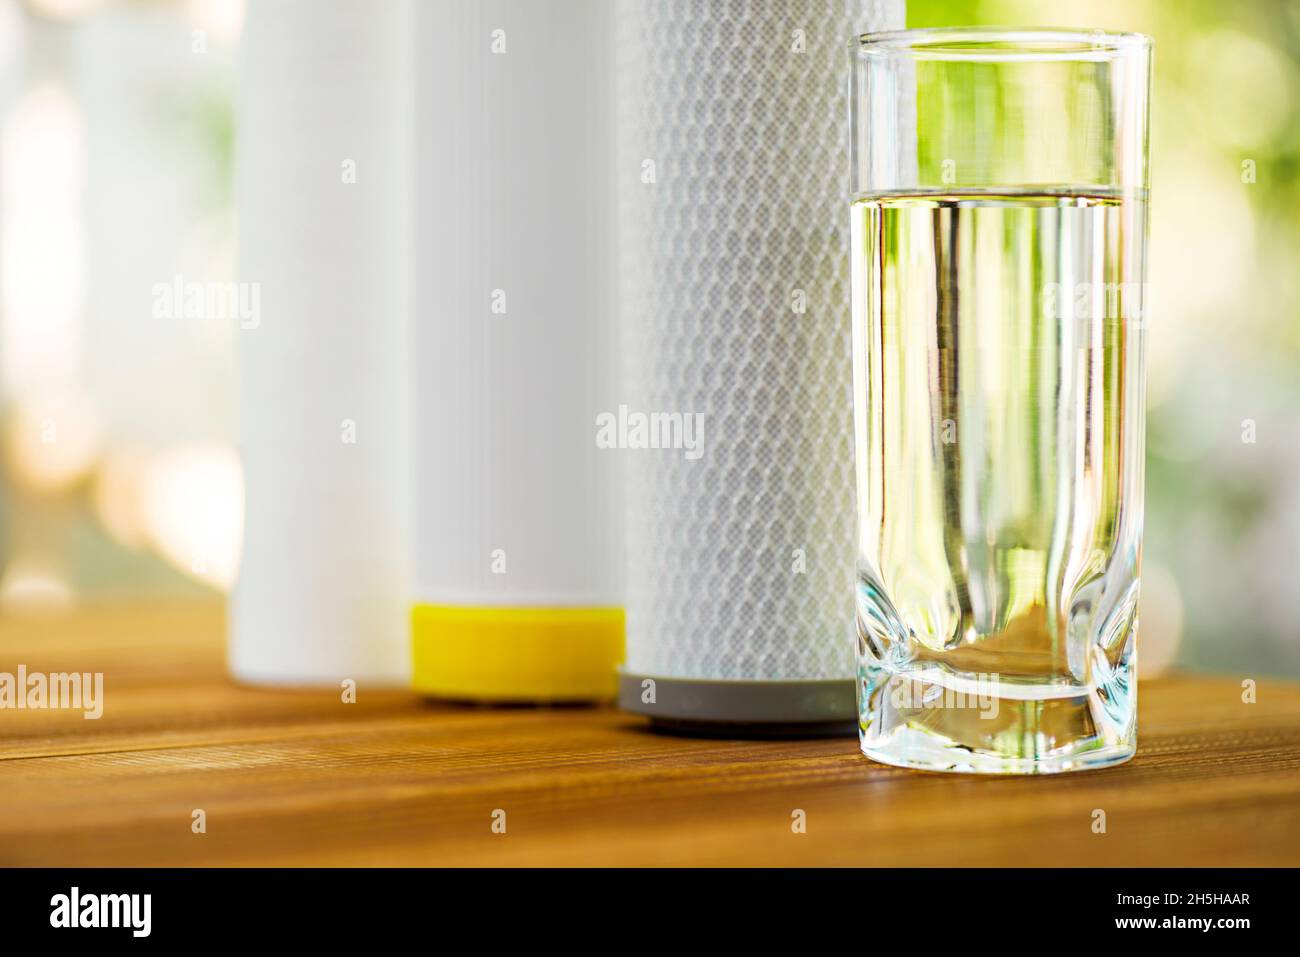 A glass of purified water and filter cartridges on wooden table on green natural background Stock Photo